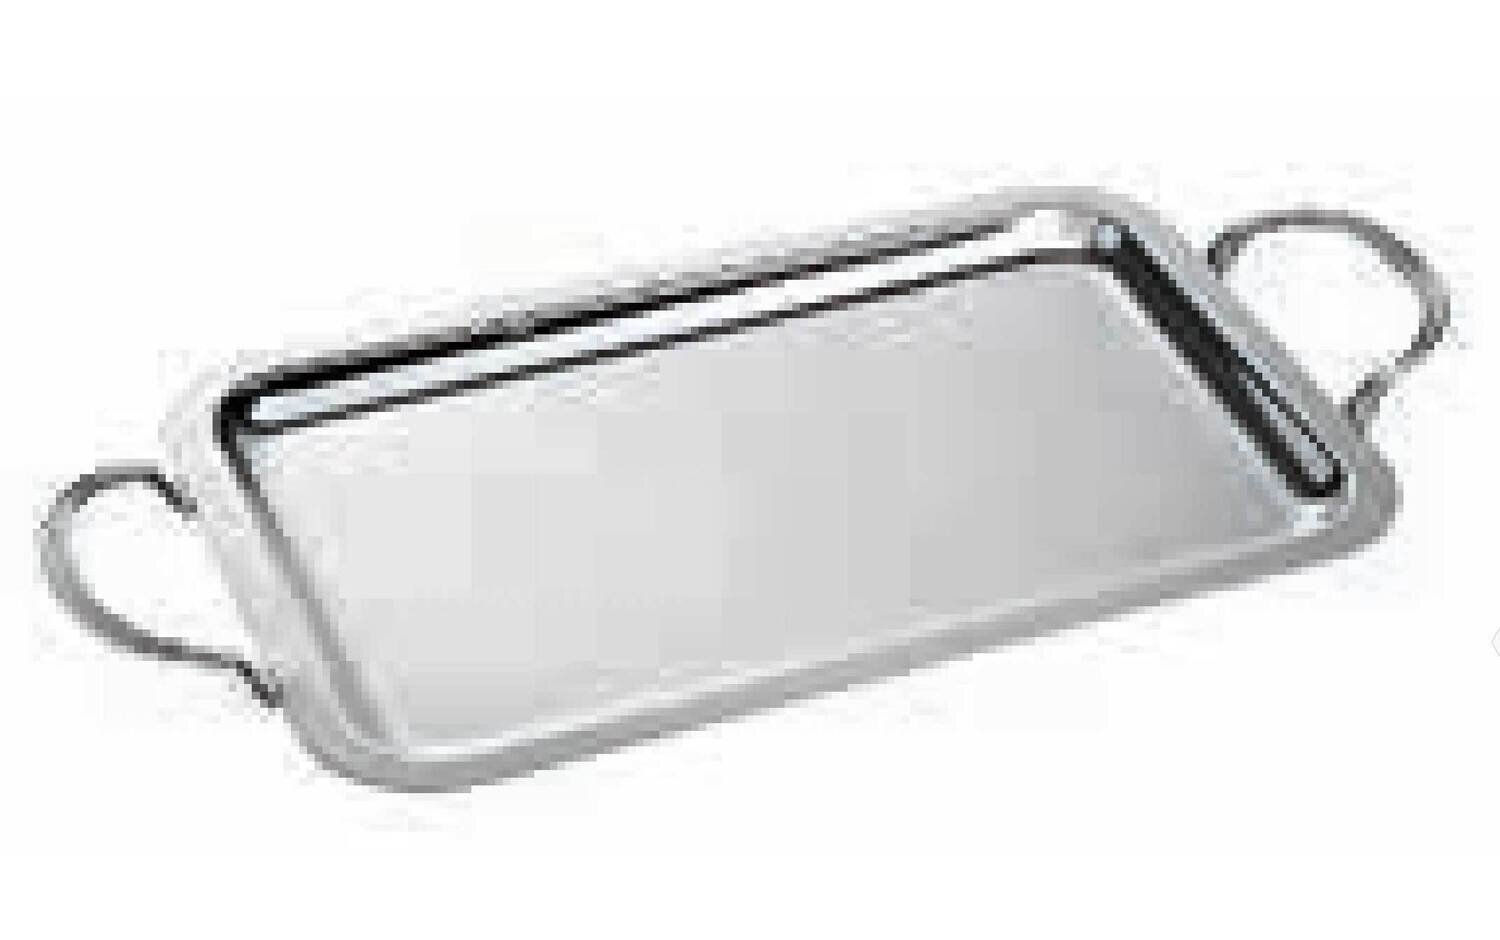 Ercuis Classique Rectangular Serving Tray With Handles 15.75 x 10.25 Inch Silver Plated F530450-40